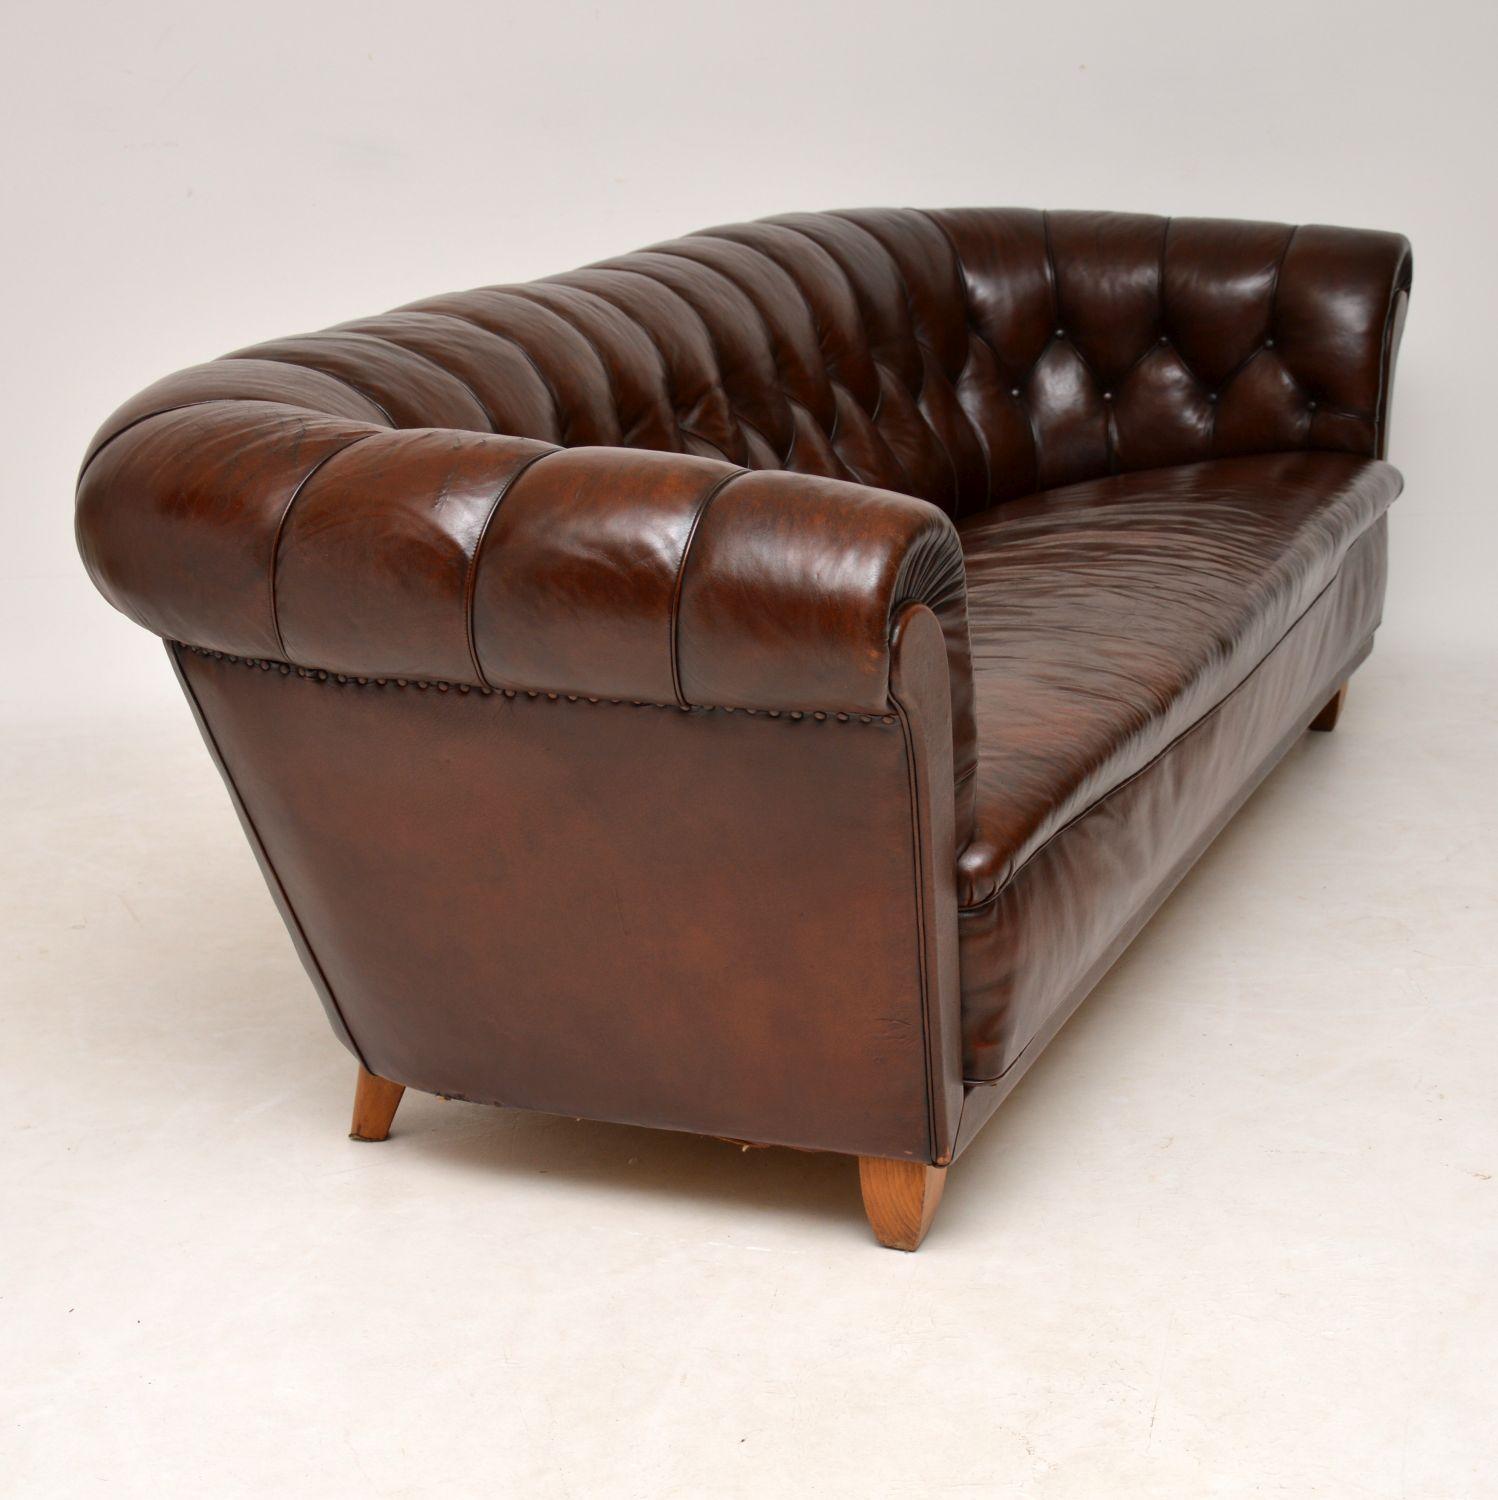 Mid-20th Century Antique Swedish Leather Chesterfield Sofa